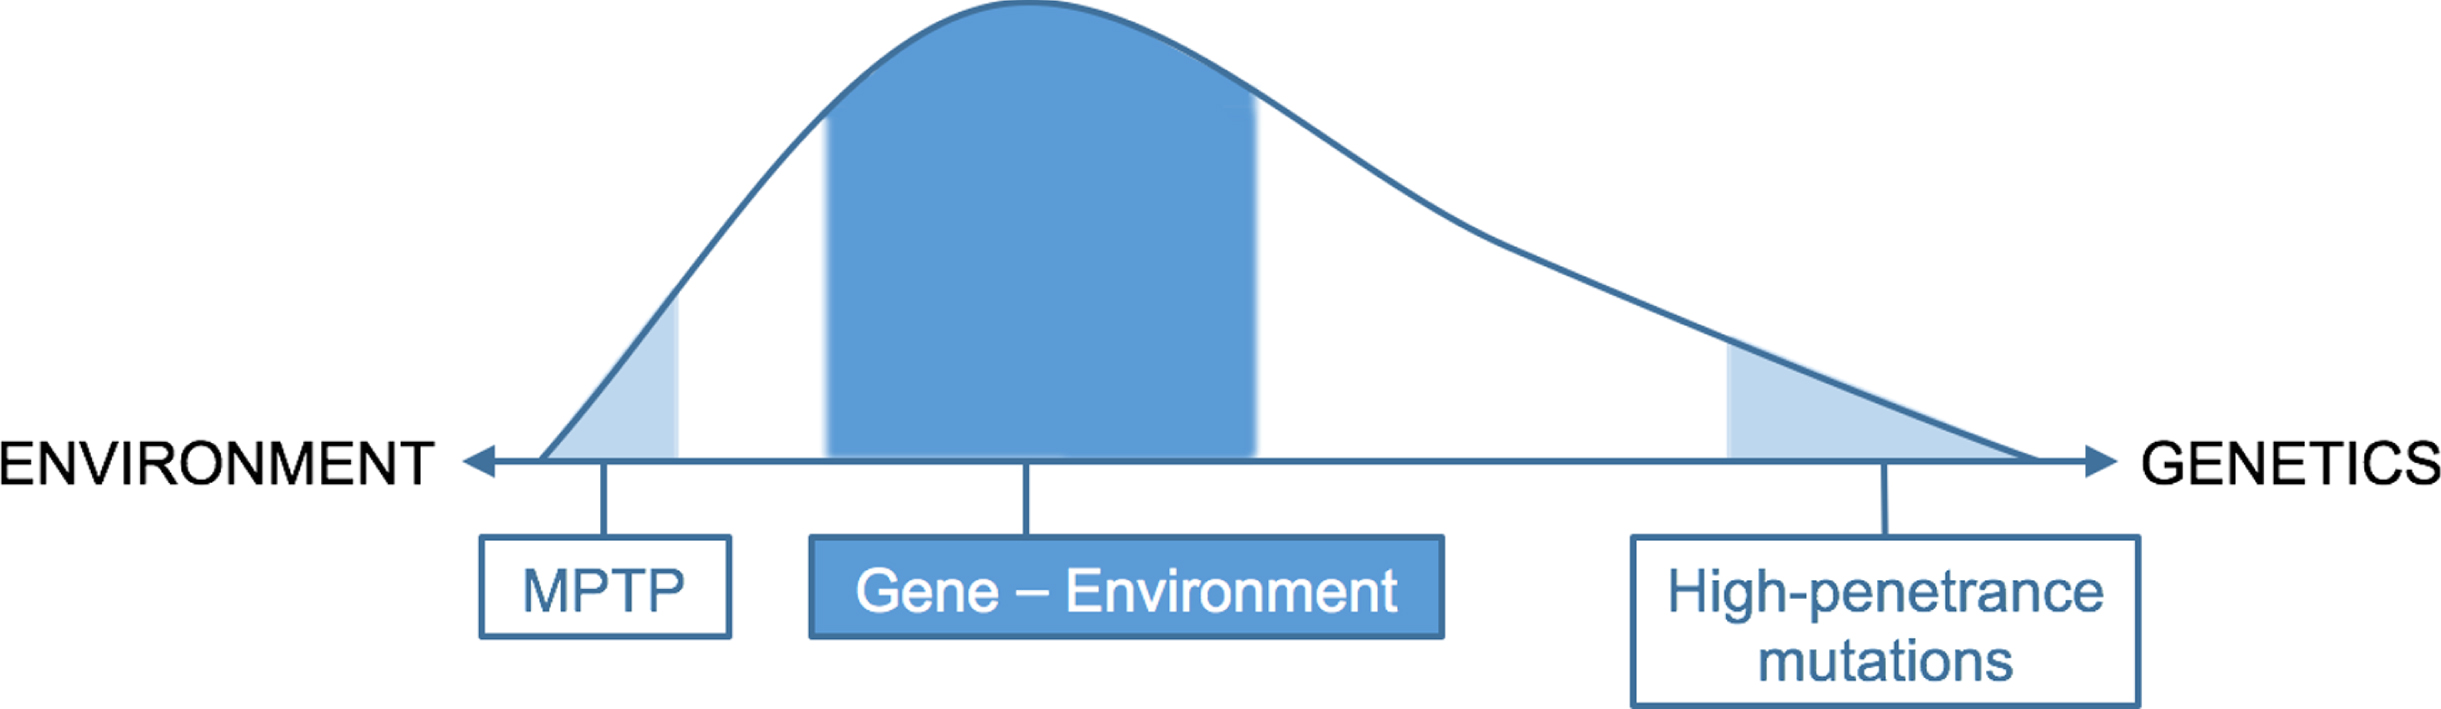 Proposed schematic distribution of etiology of PD, with a skew favoring environmental factors.